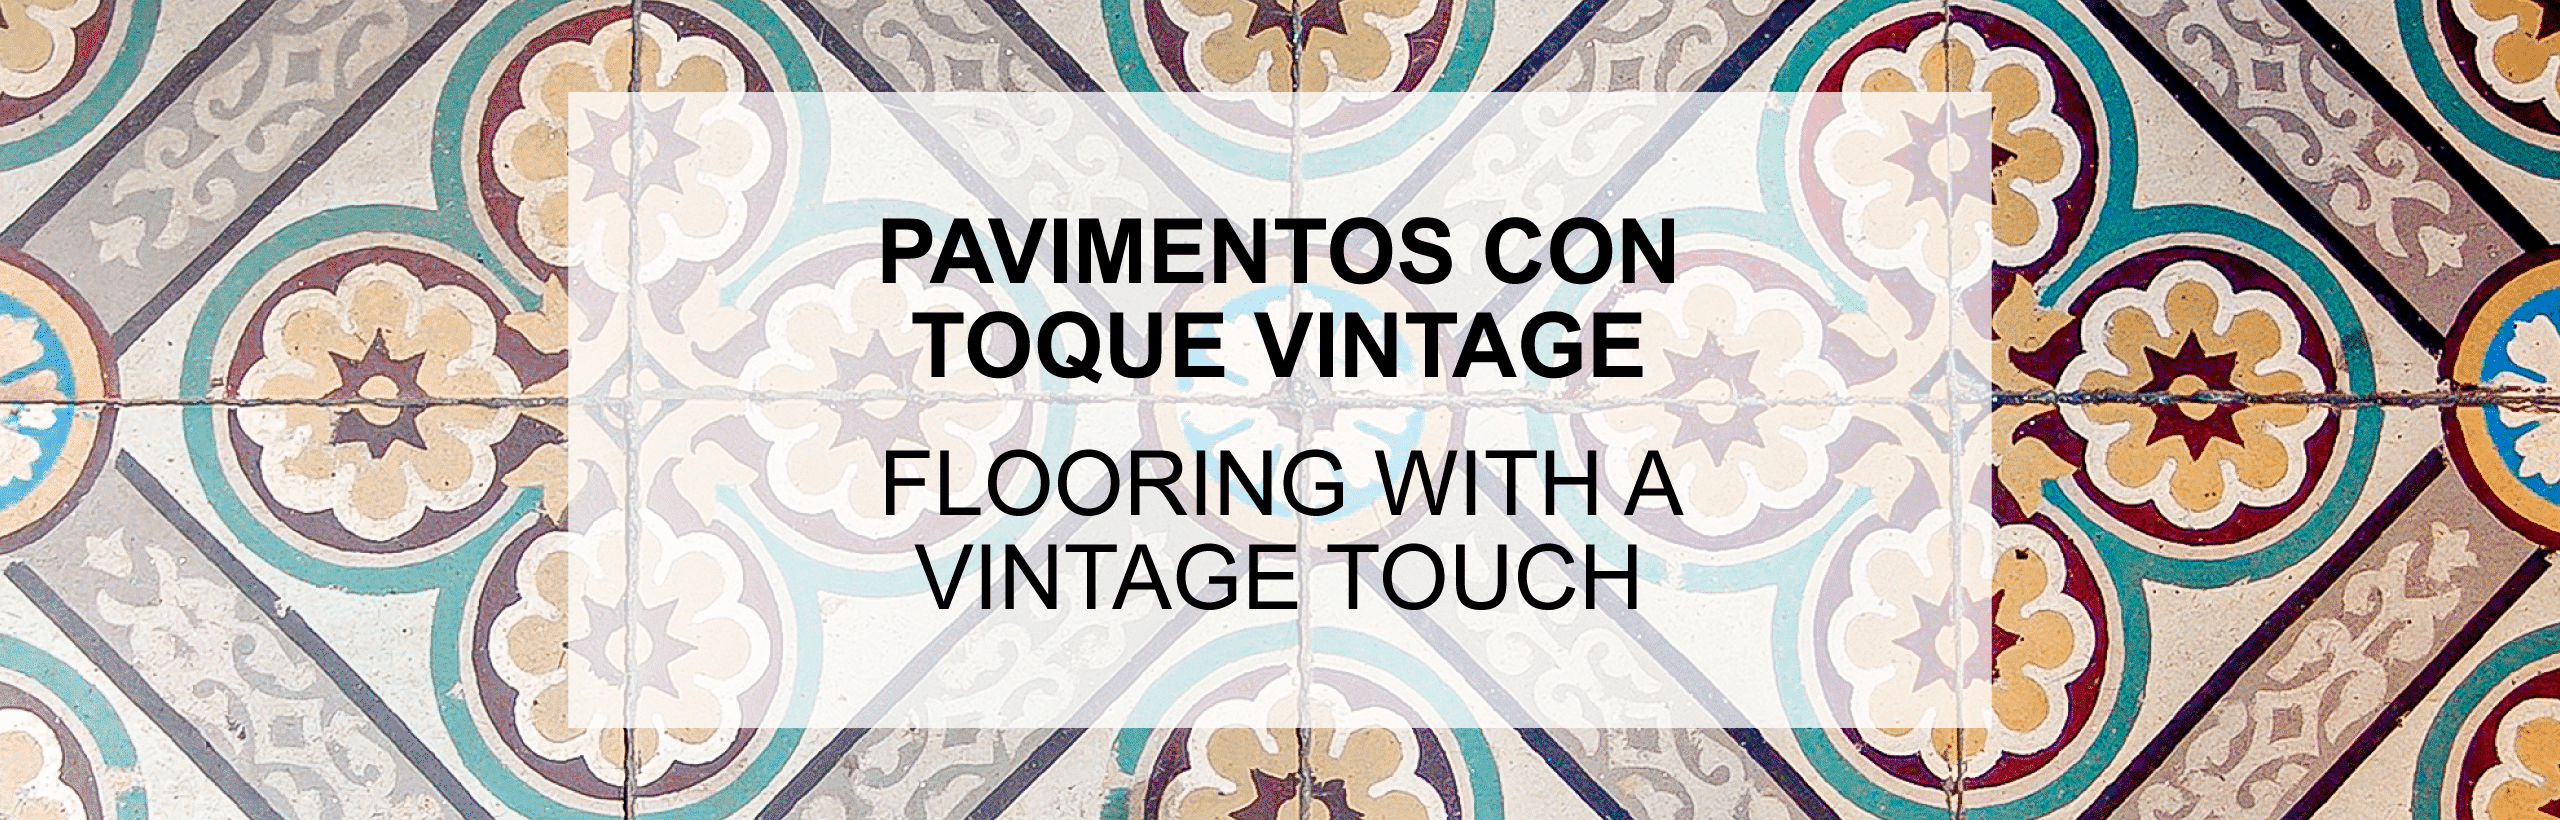 flooring-with-a-vintage-touch